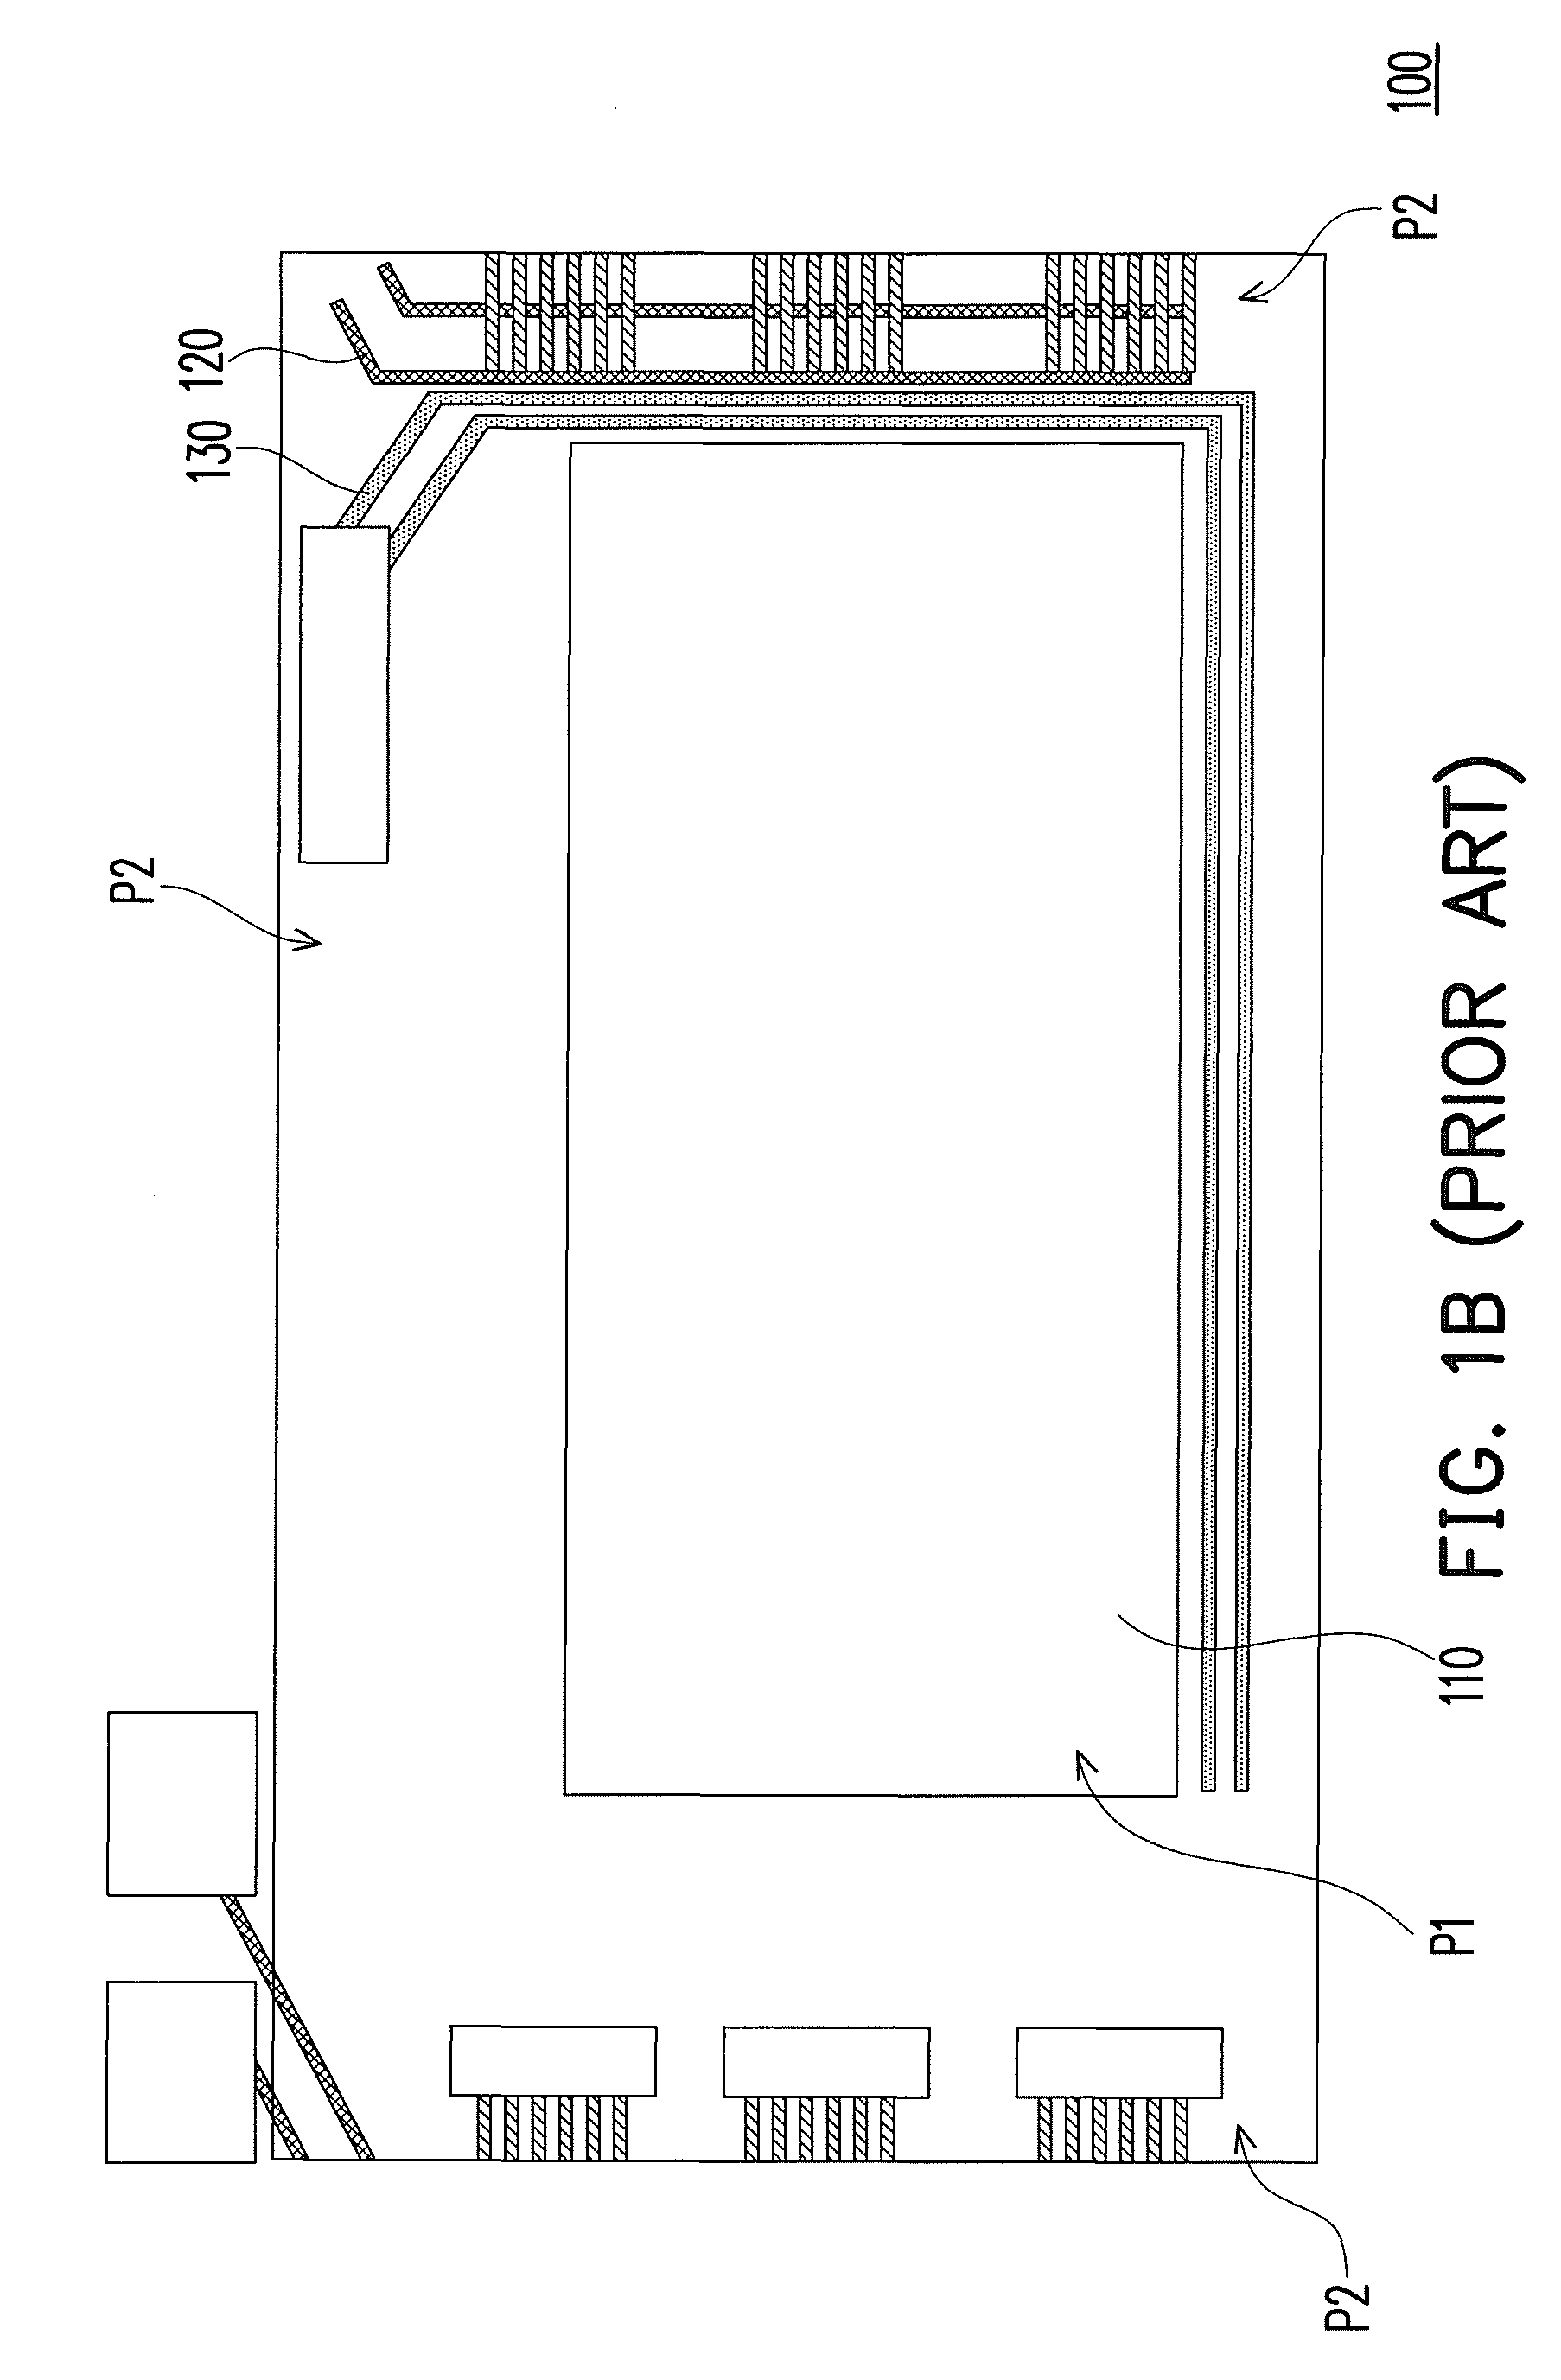 Array substrate with test shorting bar and display panel thereof